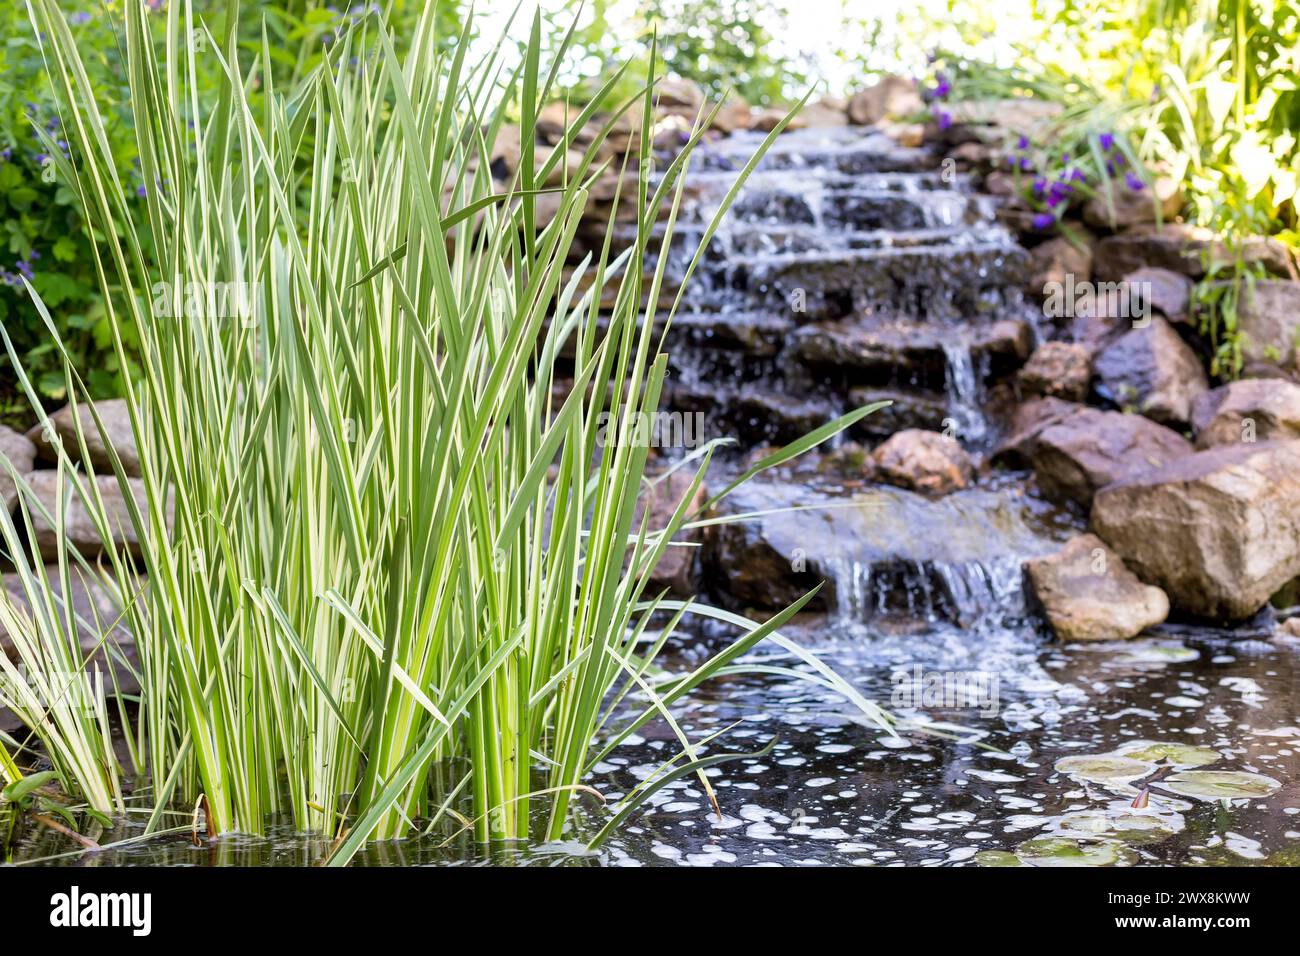 Variegated Sweet Flag (Acorus calamus) in a man-made pond with a cascading fountain Stock Photo